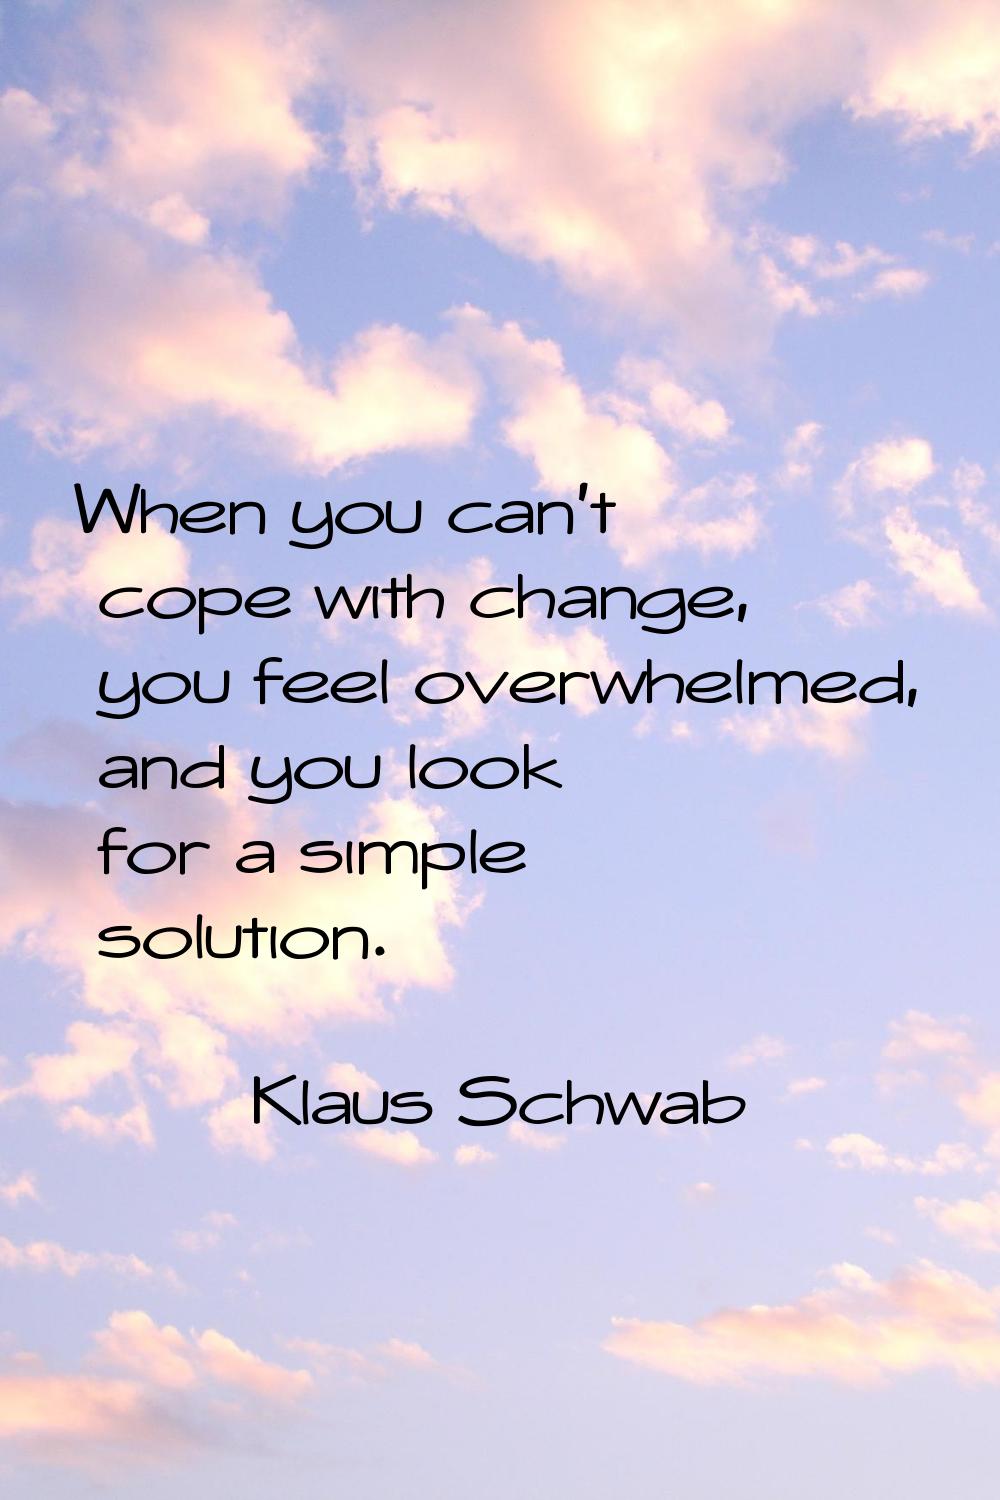 When you can't cope with change, you feel overwhelmed, and you look for a simple solution.